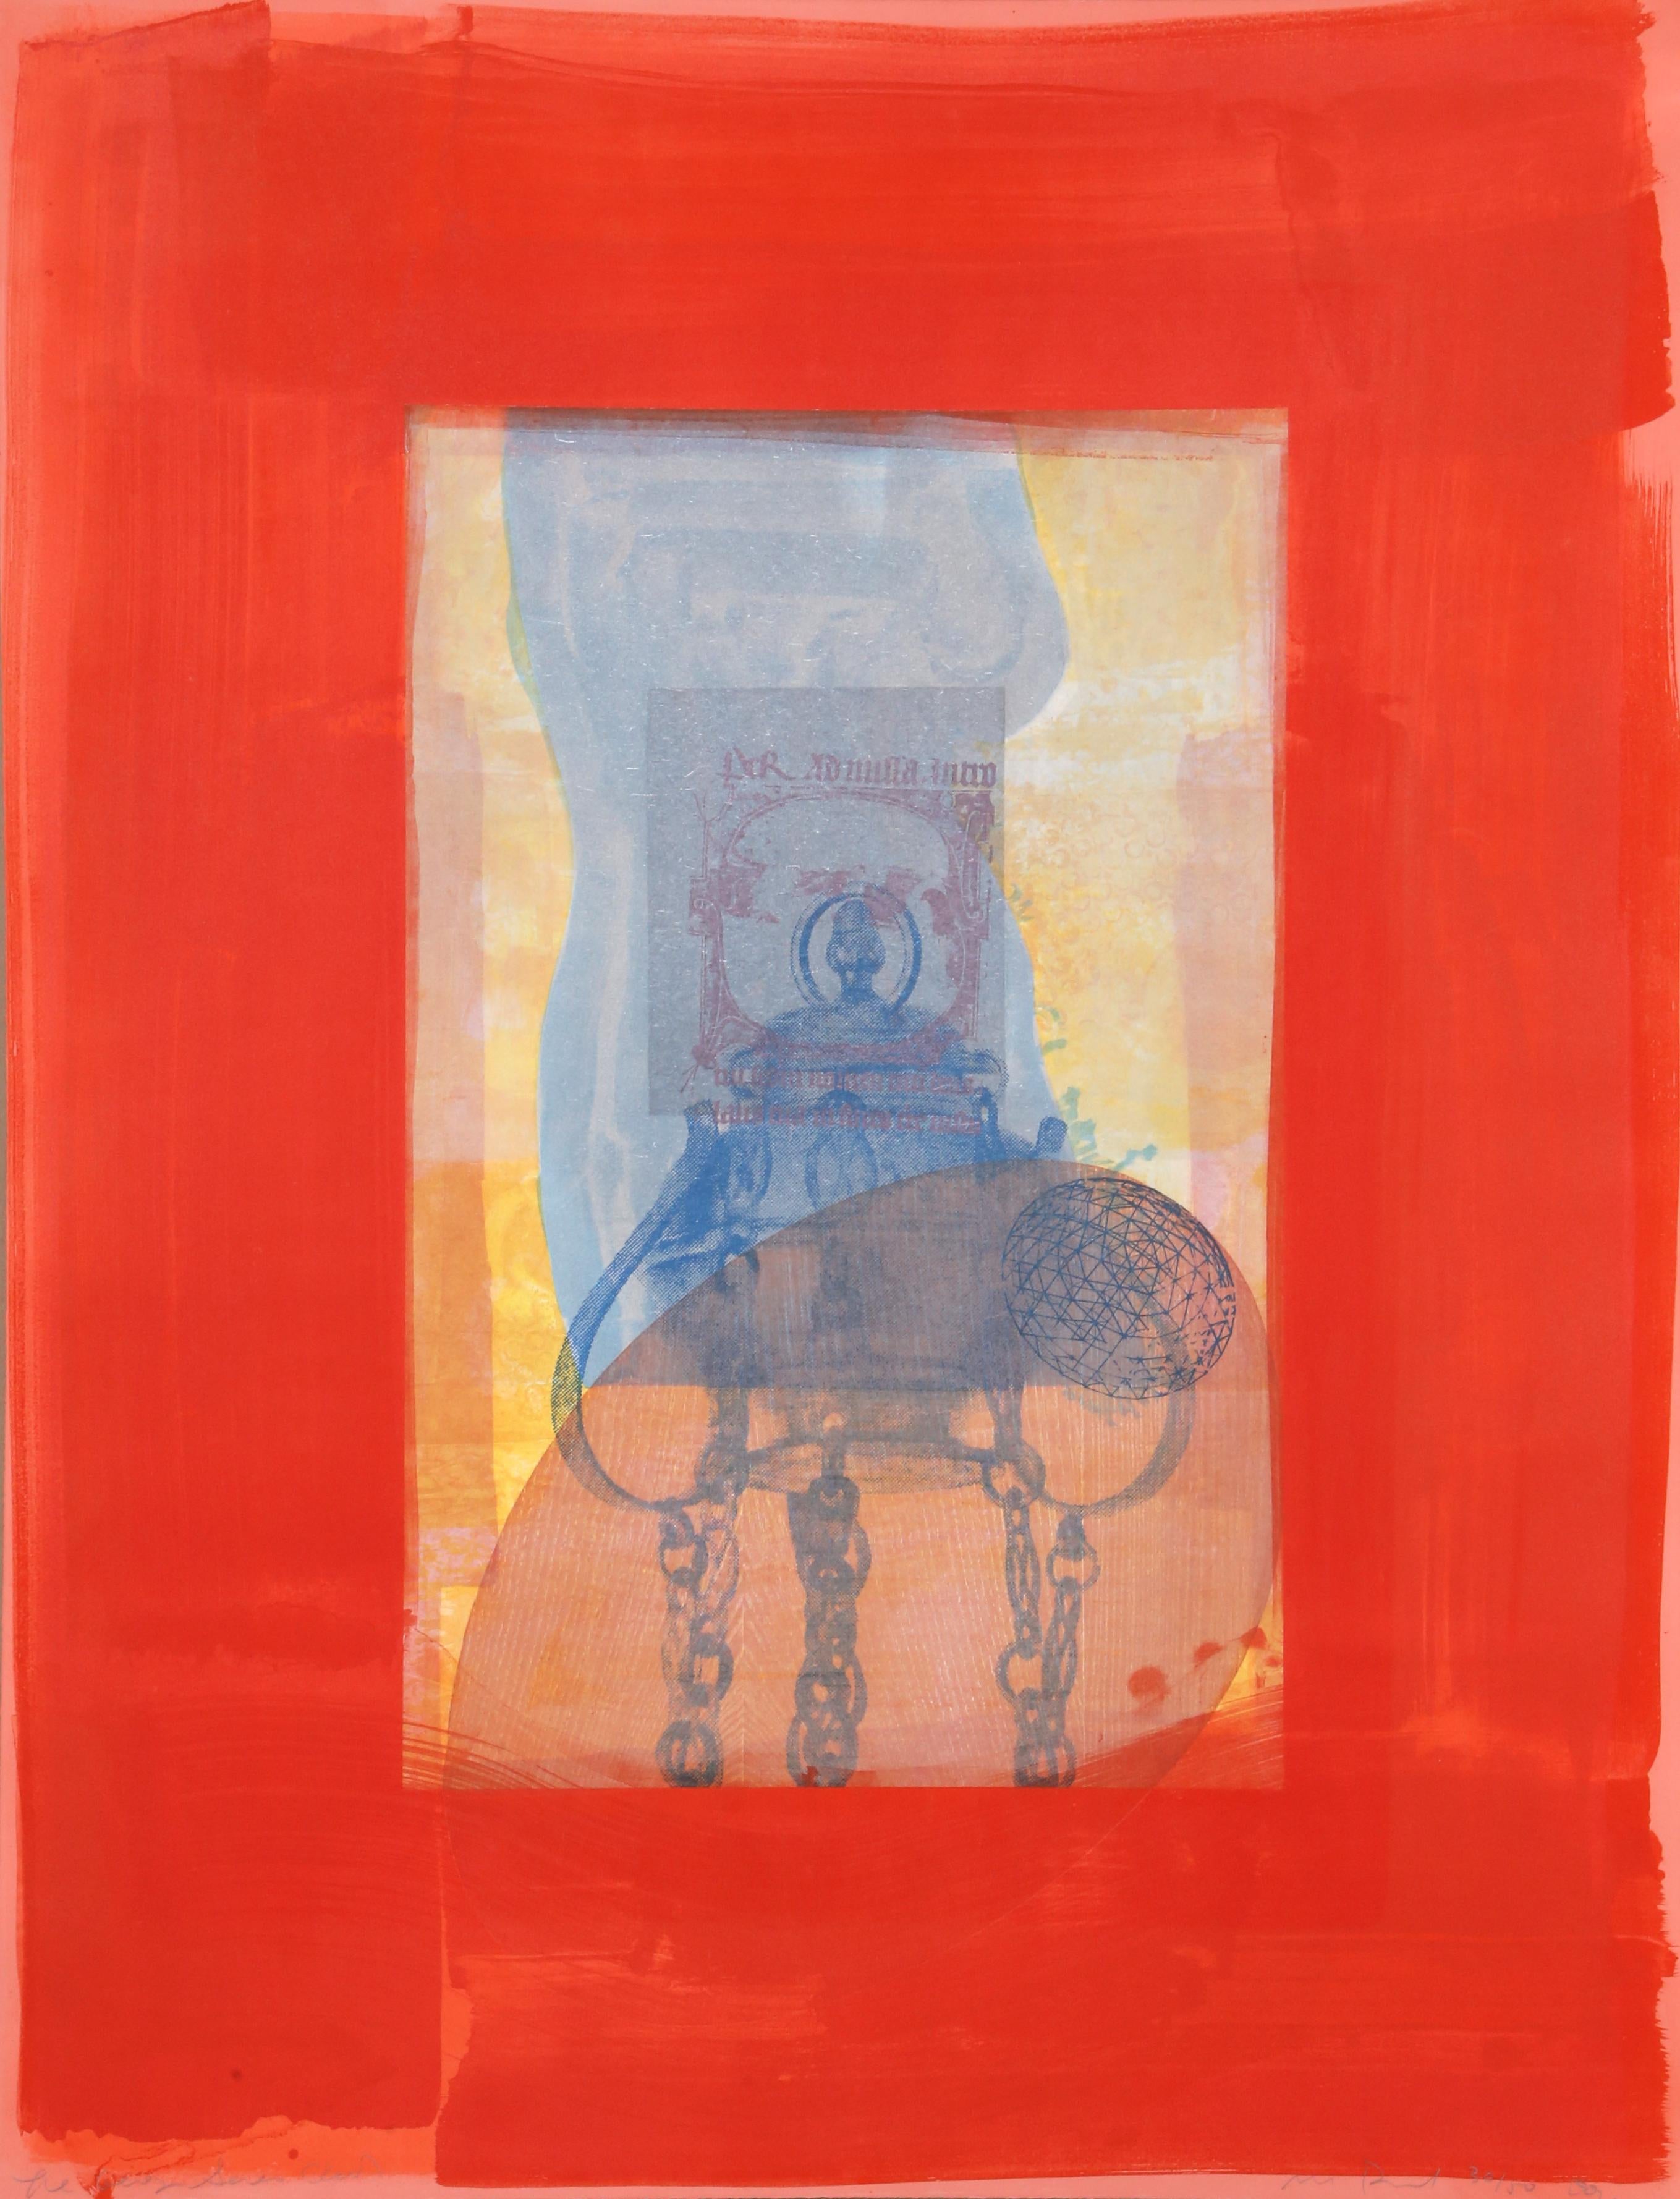 Artist: Michael David, American (1954 - )
Title: Red from the Being Series
Year: 1991
Medium: Lithograph, signed and numbered in pencil
Edition: 50
Size: 46 x 35 in. (116.84 x 88.9 cm)
